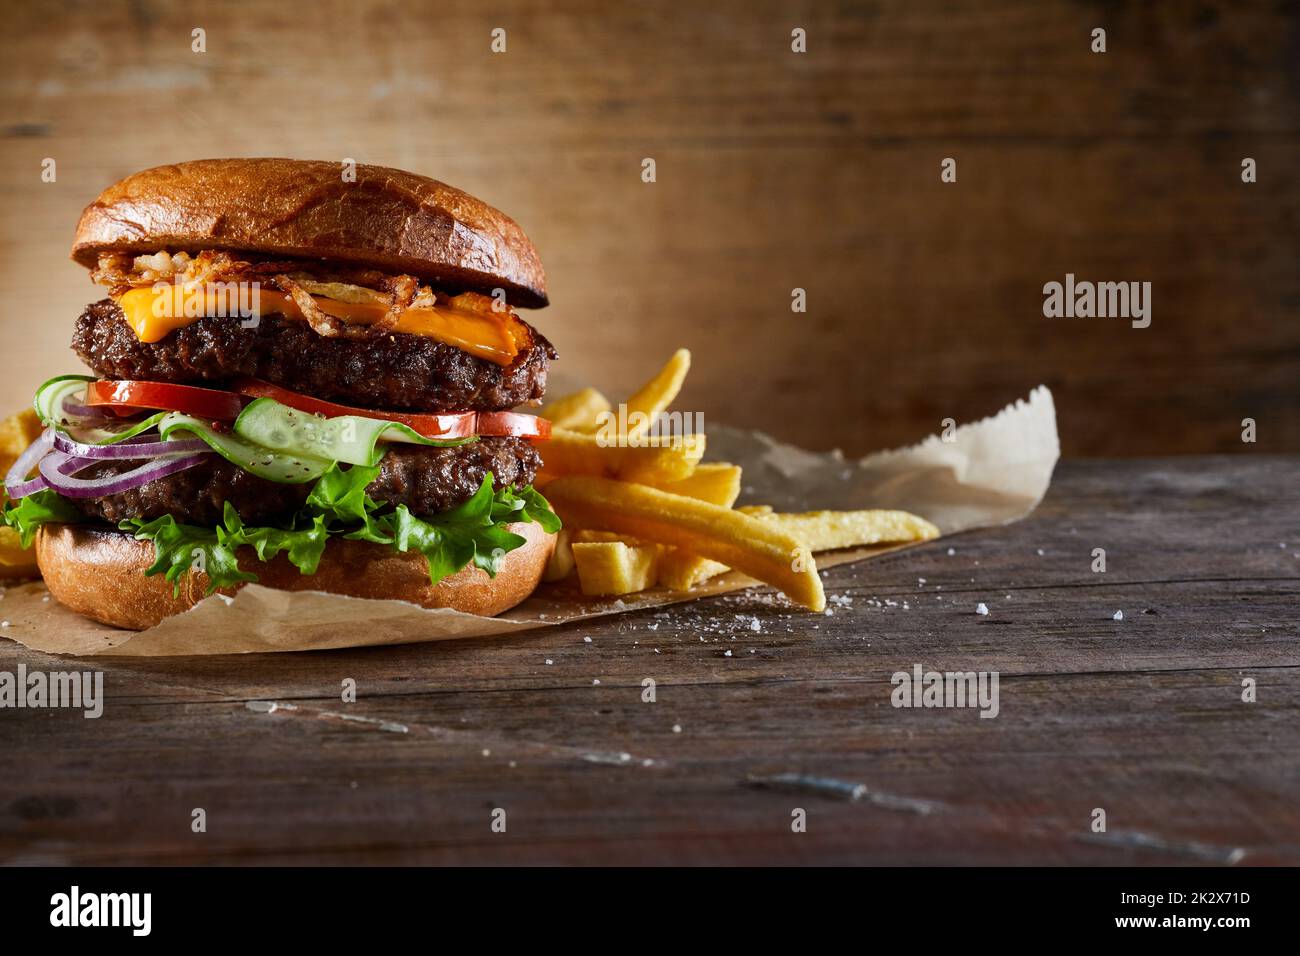 Burger with vegetables served with fries Stock Photo